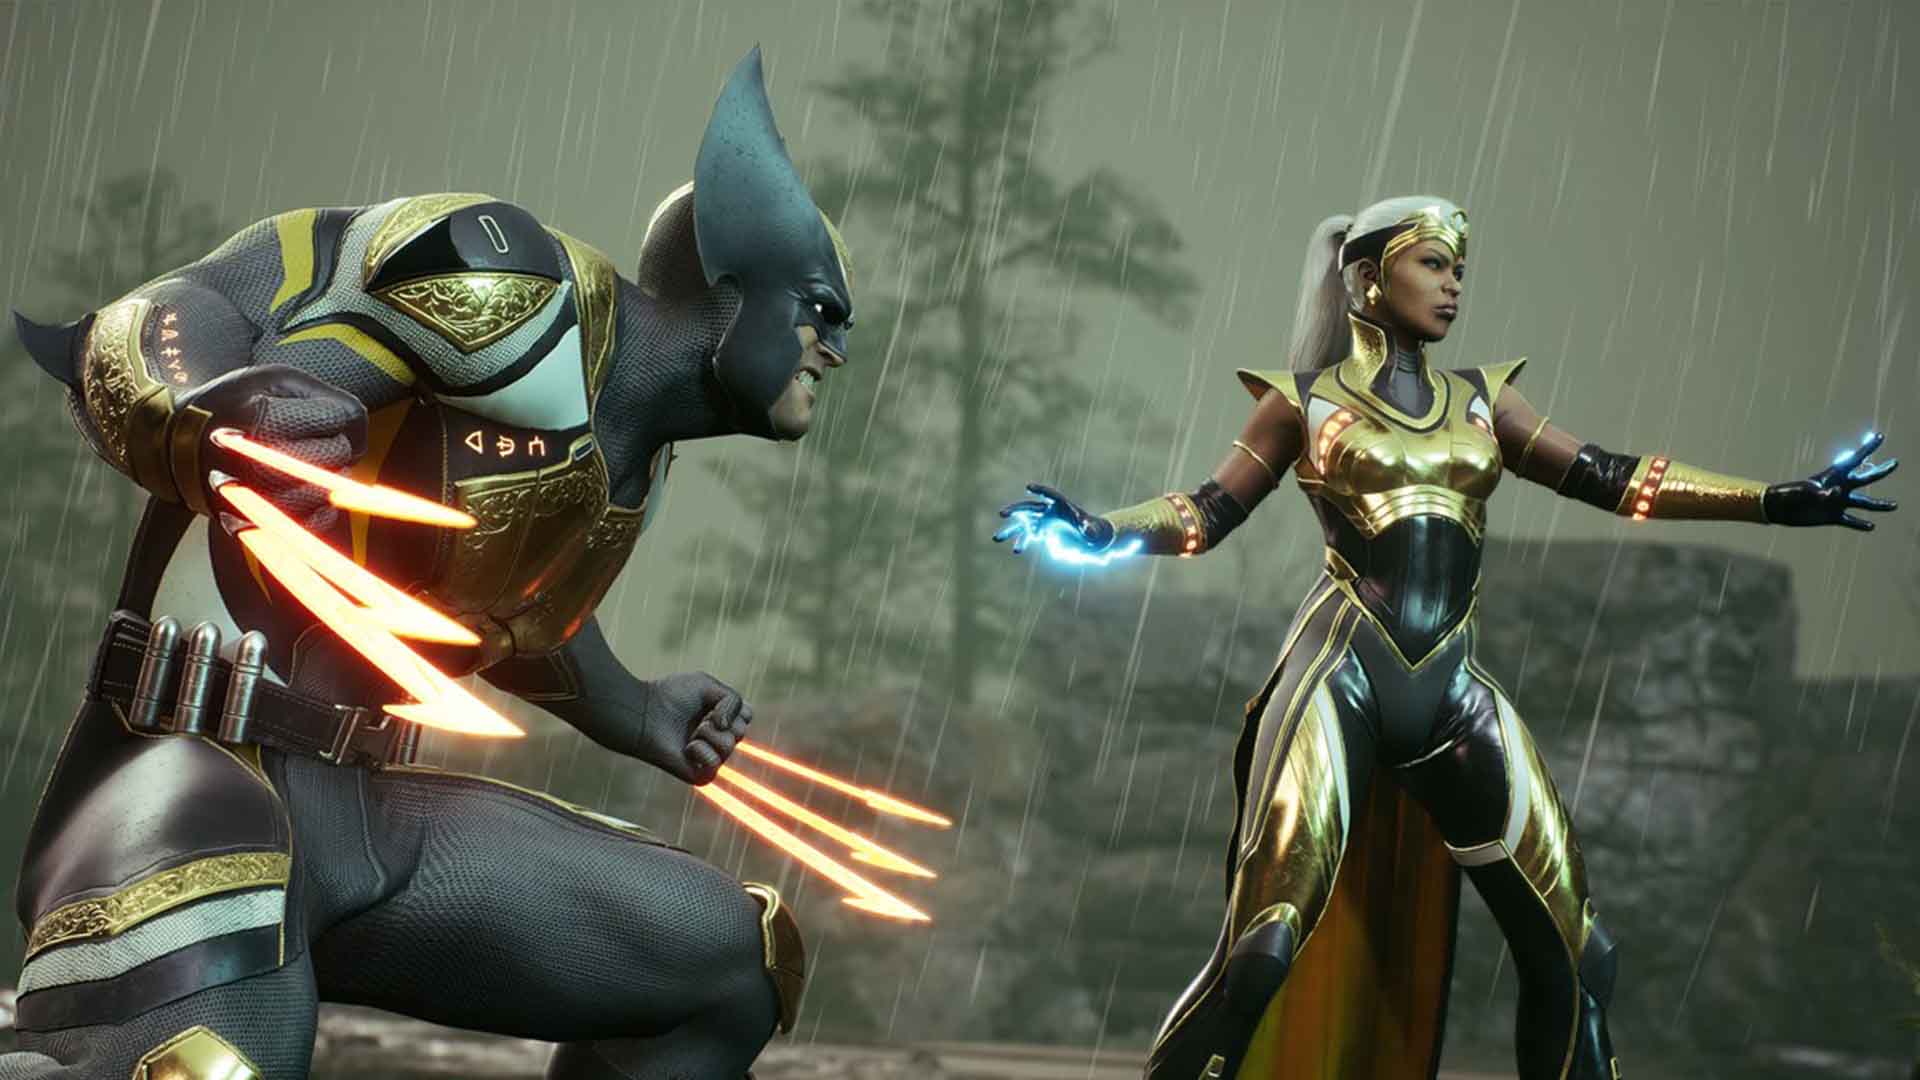 Marvel's Midnight Suns Coming to PS4 and Xbox One Digitally on May 11,  Storm DLC Also Coming — Too Much Gaming